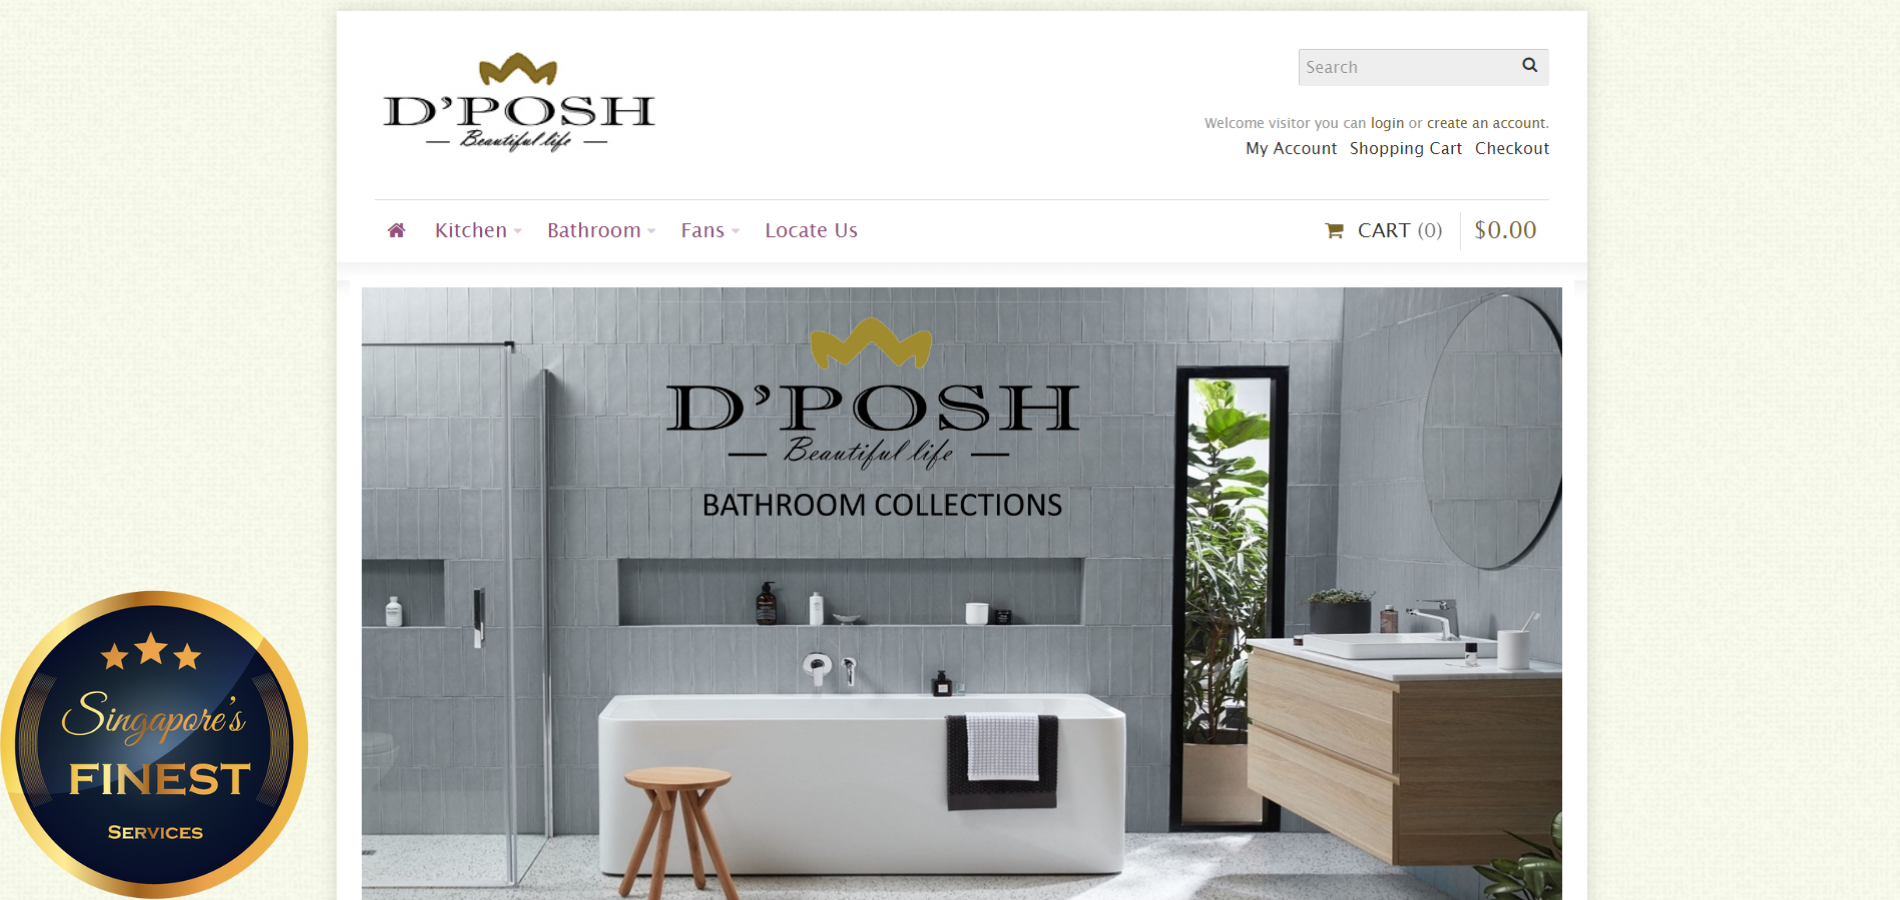 The Finest Bathroom Fixtures Shops in Singapore